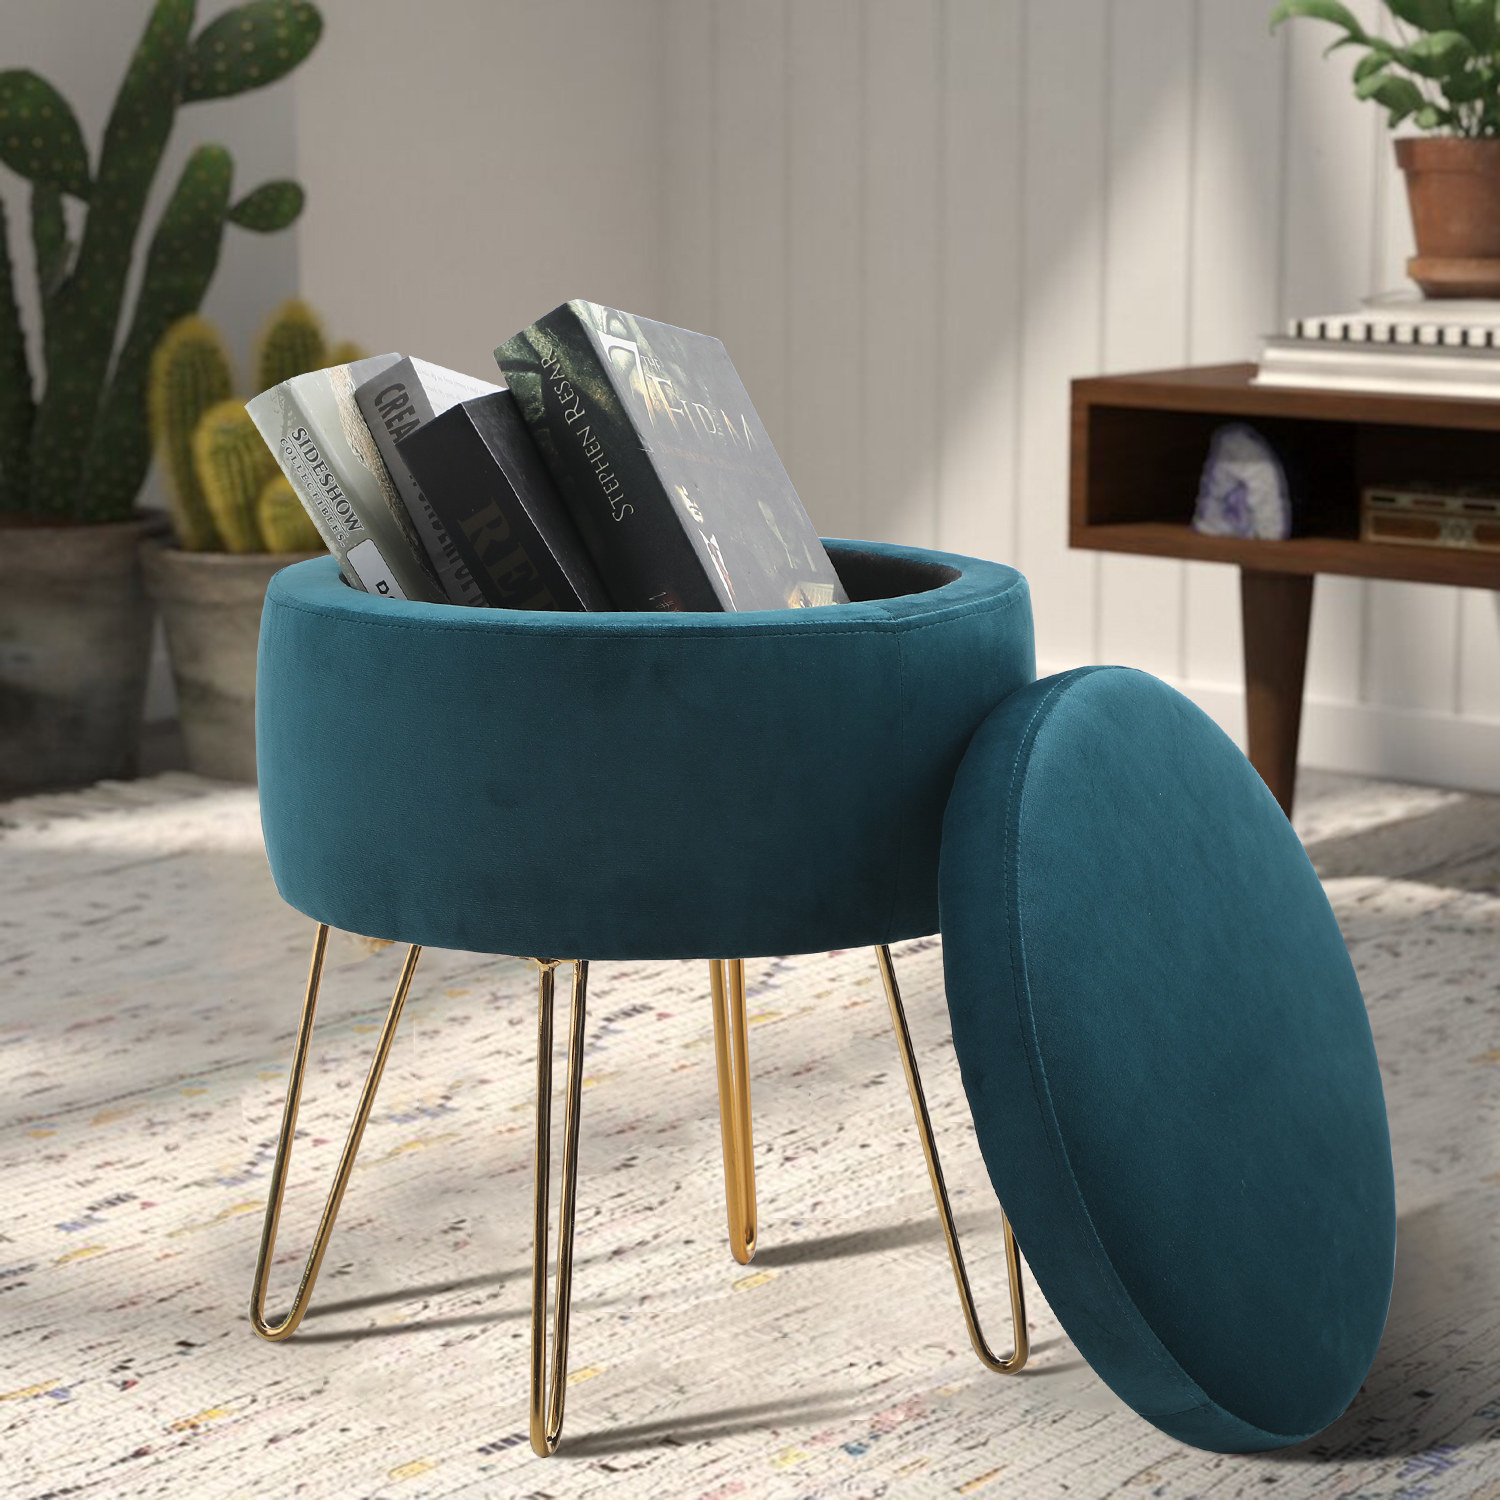 The ottoman in the color Teal